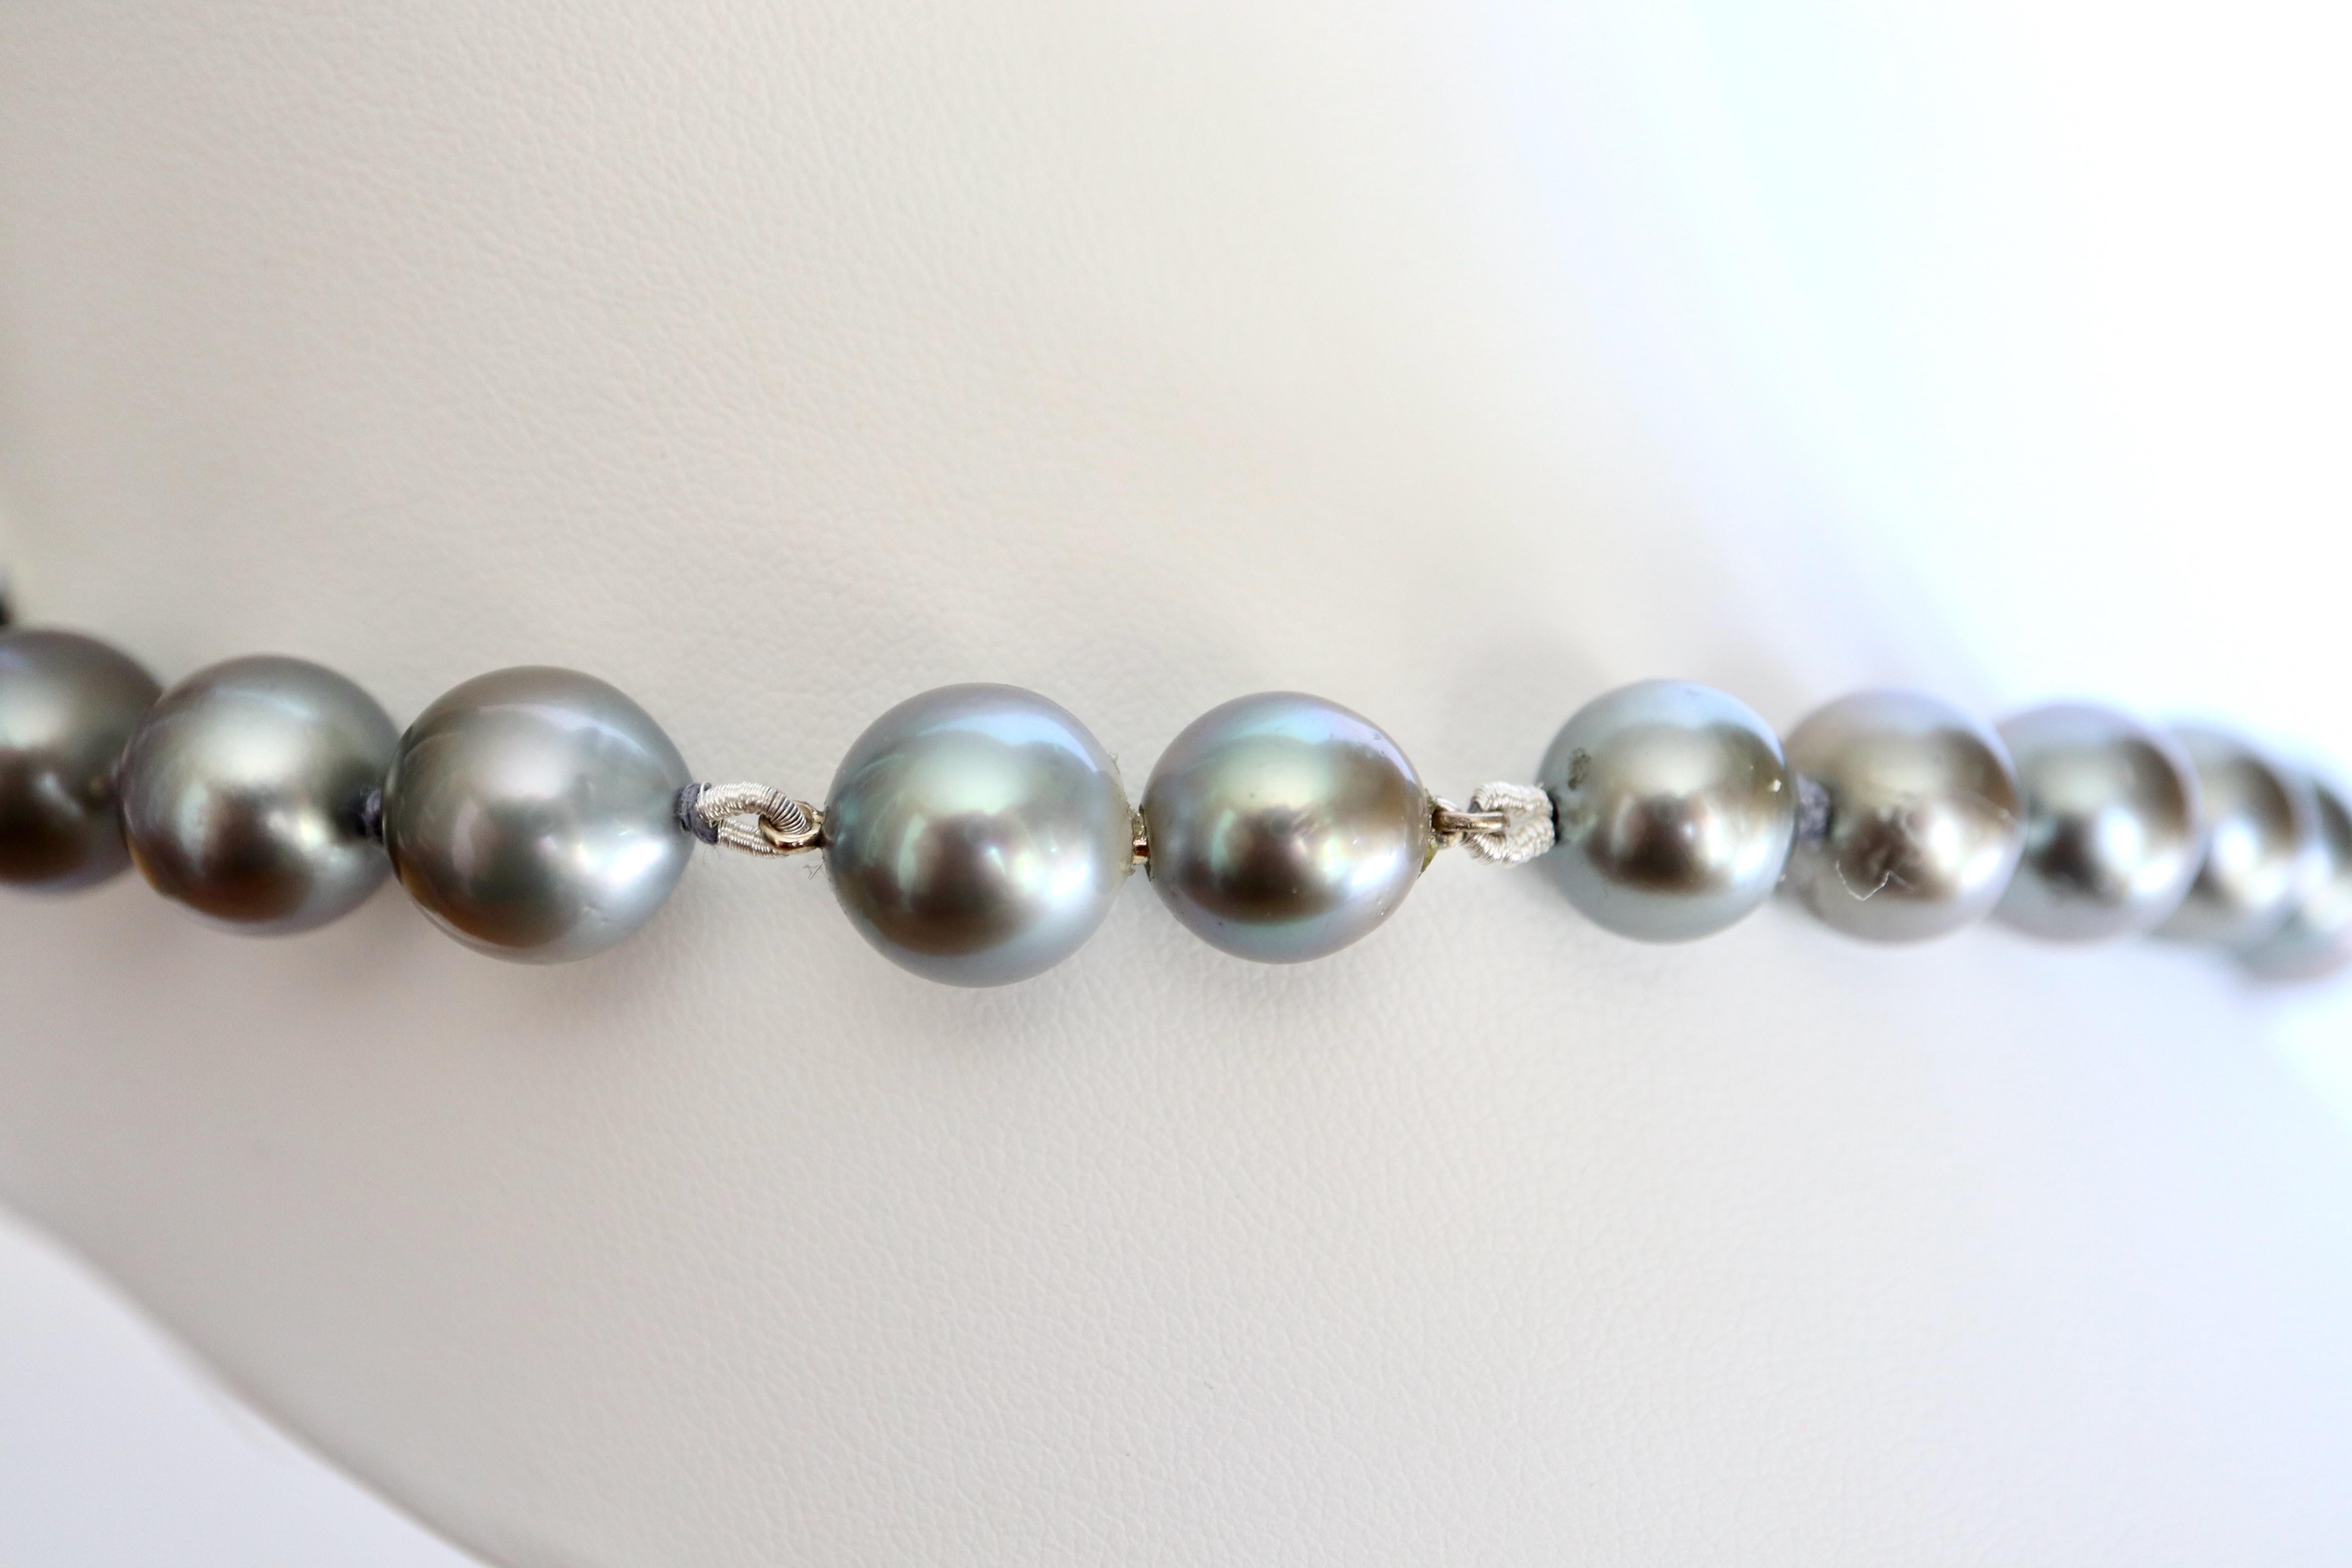 Necklace of Cultured Grey Pearls 9 mm to 13 mm In Good Condition For Sale In Paris, FR